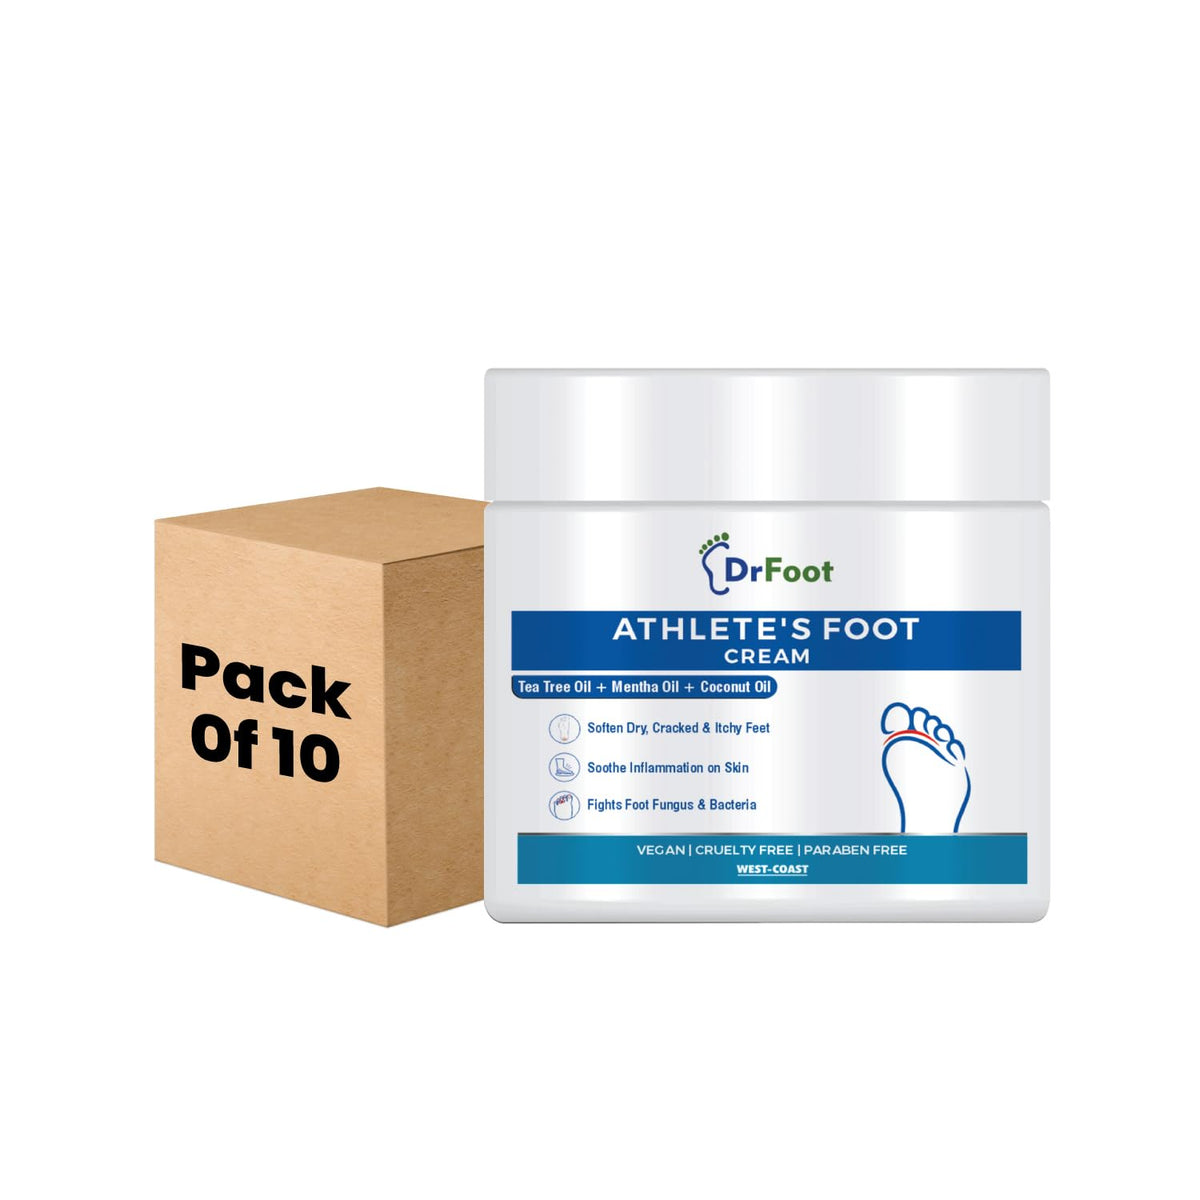 Dr Foot Athlete’s Foot Cream, Especially for the Athlete’s Feet, With the Goodness of Tea Tree Oil, Menthol Oil, Coconut Oil, Neem Oil, Apple Cider Vinegar, Vitamin E Oil - 100gm (Pack of 10)